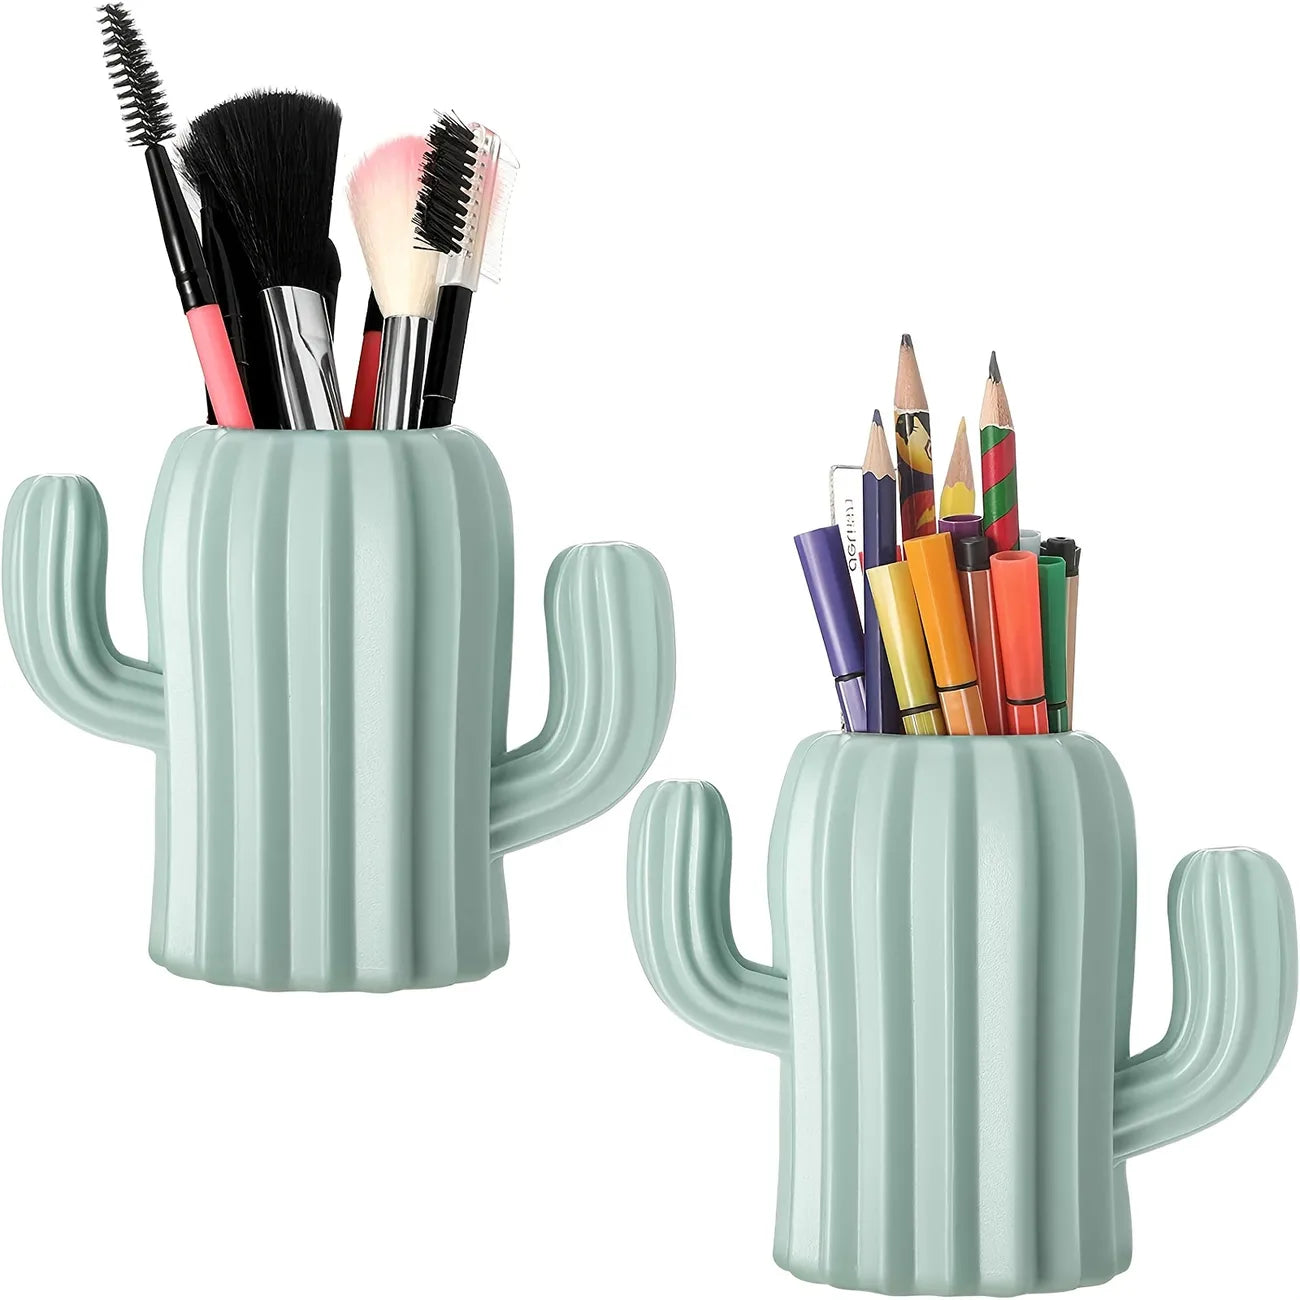 Cacti hold my brushes for me